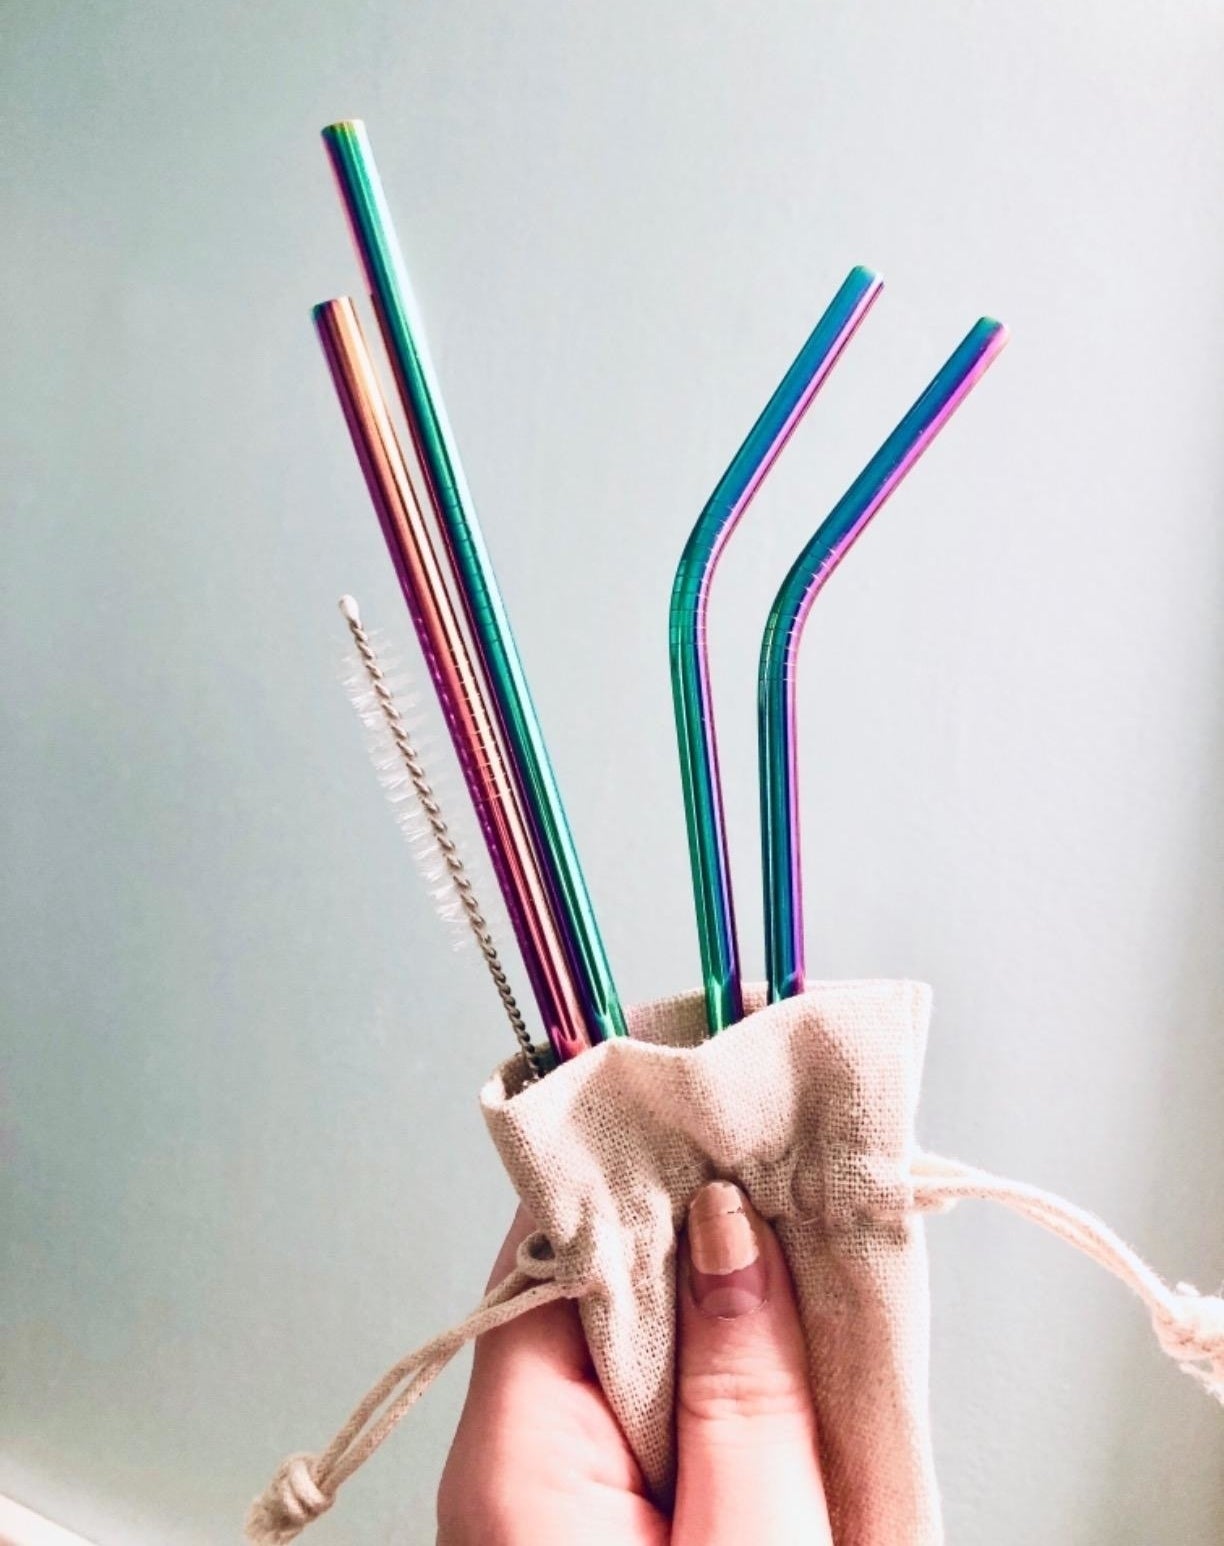 A person holding two rainbow straight straws and two bent straws with a cleaner in a fabric bag